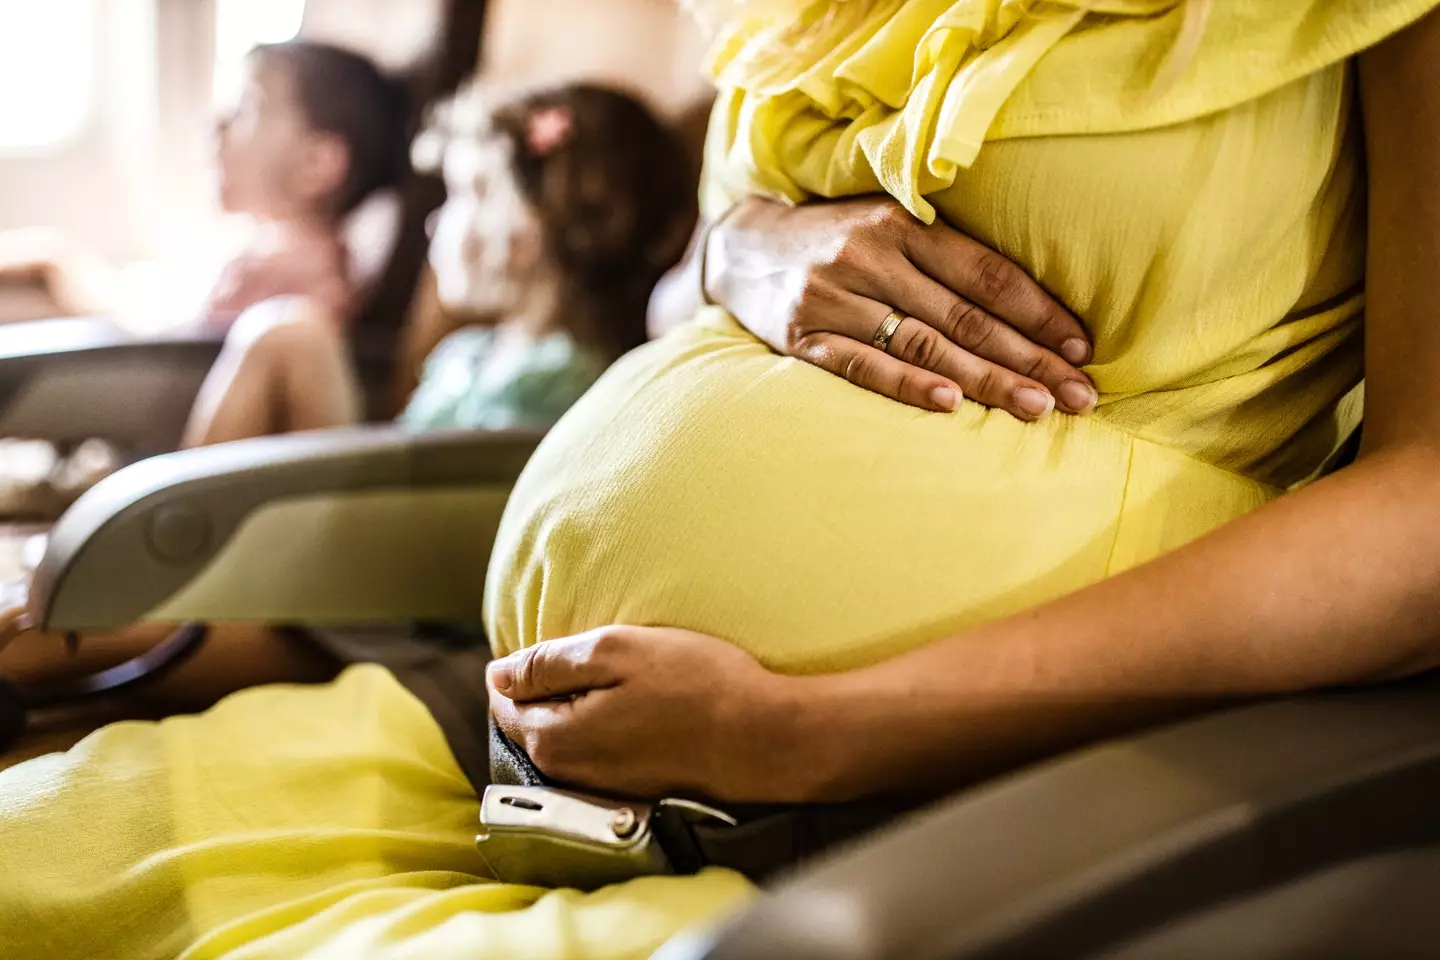 A passenger once refused to swap seats with a pregnant woman. (Getty Stock Image)